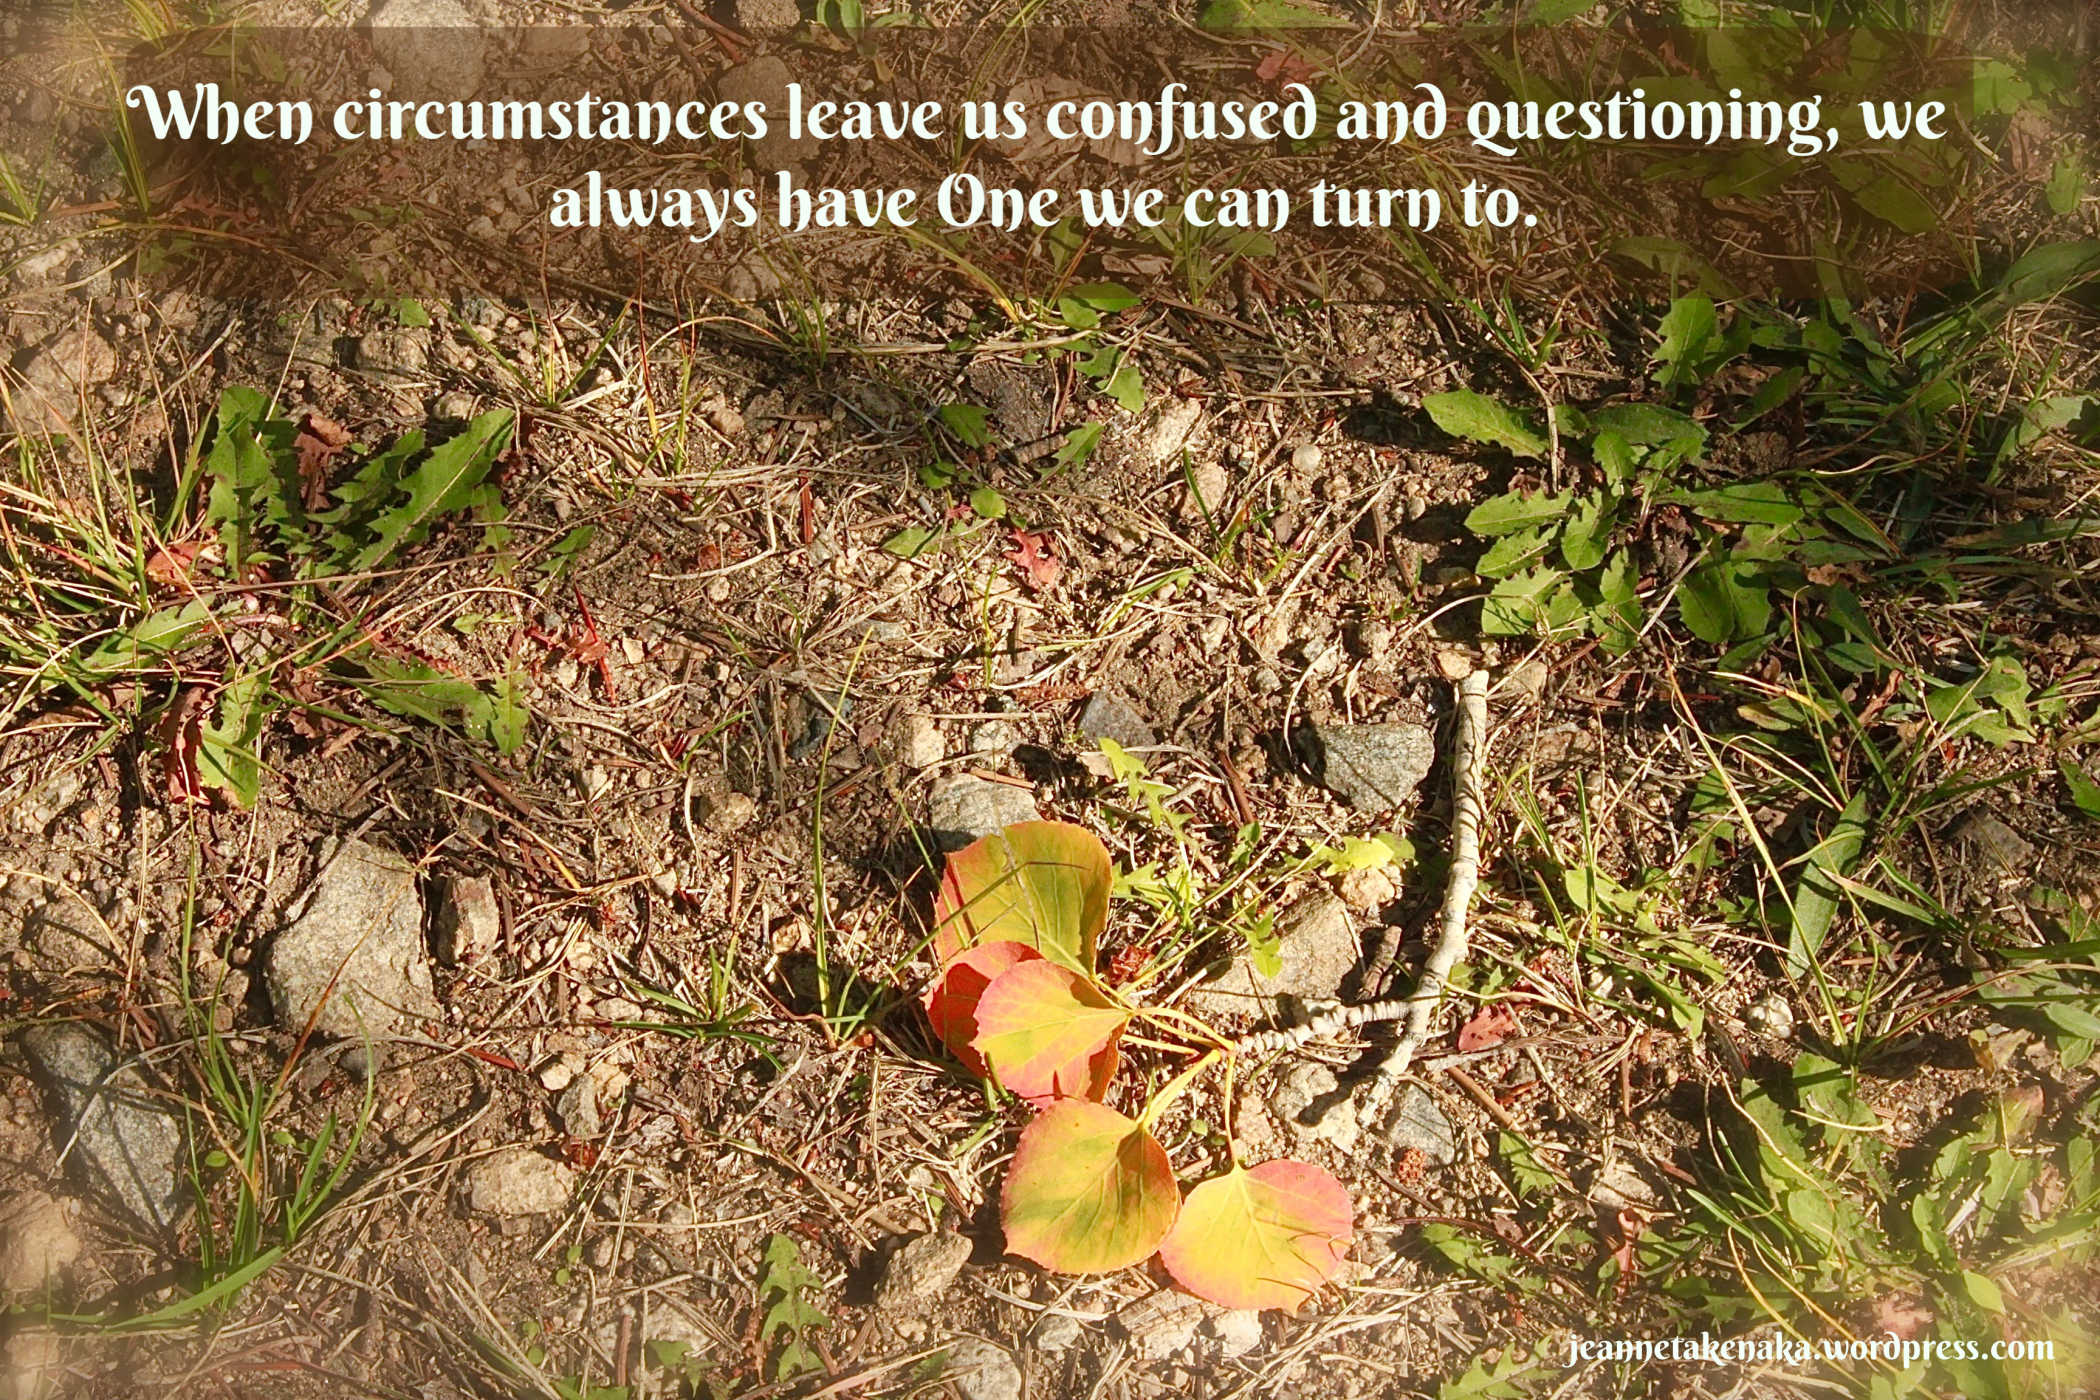 Meme that says, "When circumstances leave us confused and questioning, we always have One we can turn to." on a backdrop of leaves on a broken twig